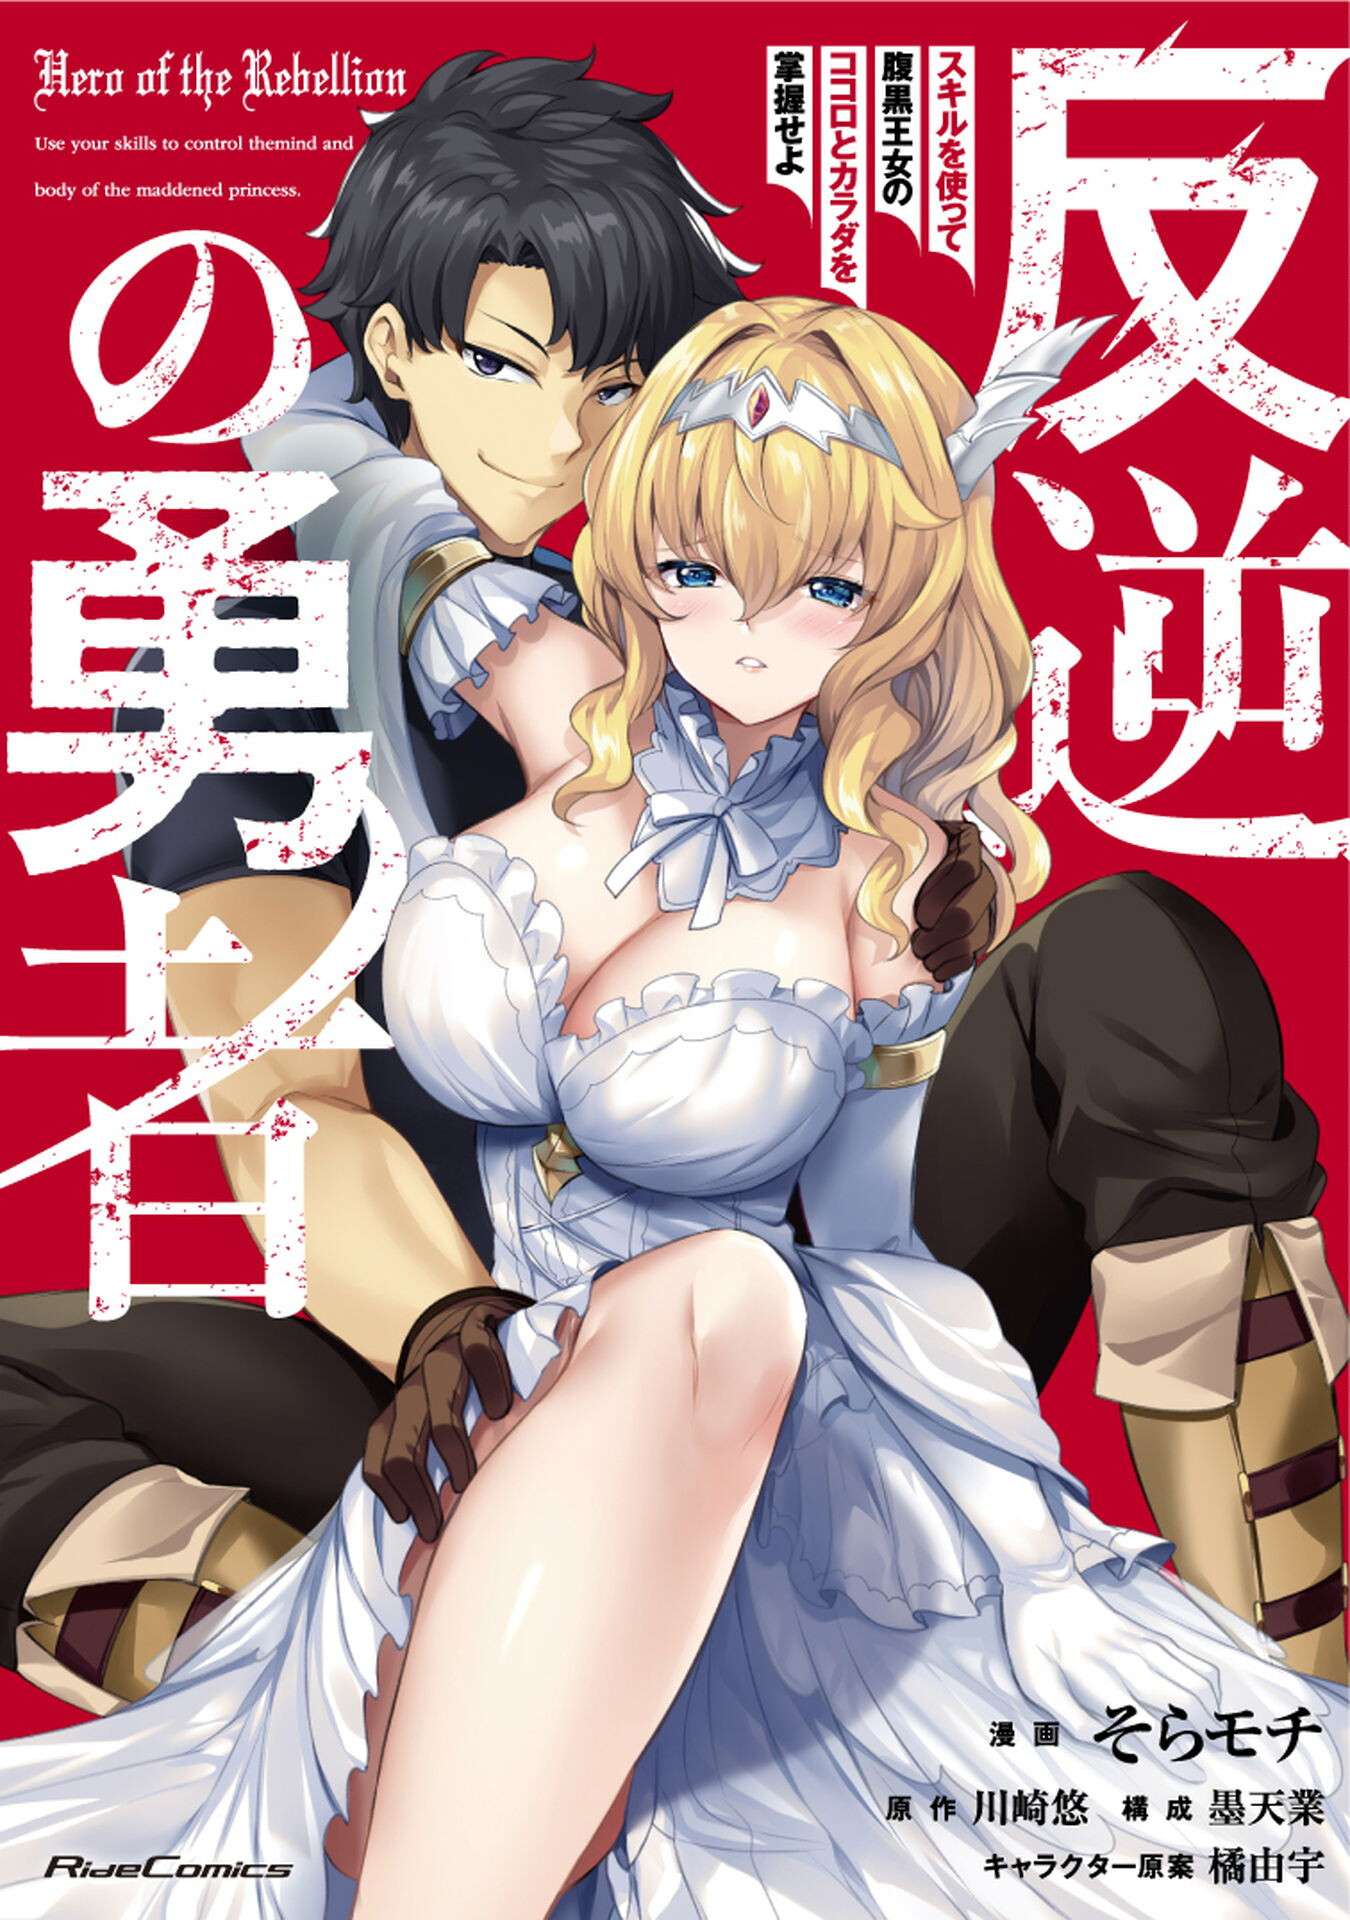 Hero Of The Rebellion: Use Your Skills To Control The Mind And Body Of The Maddened Princess - chapter 7.5 - #1